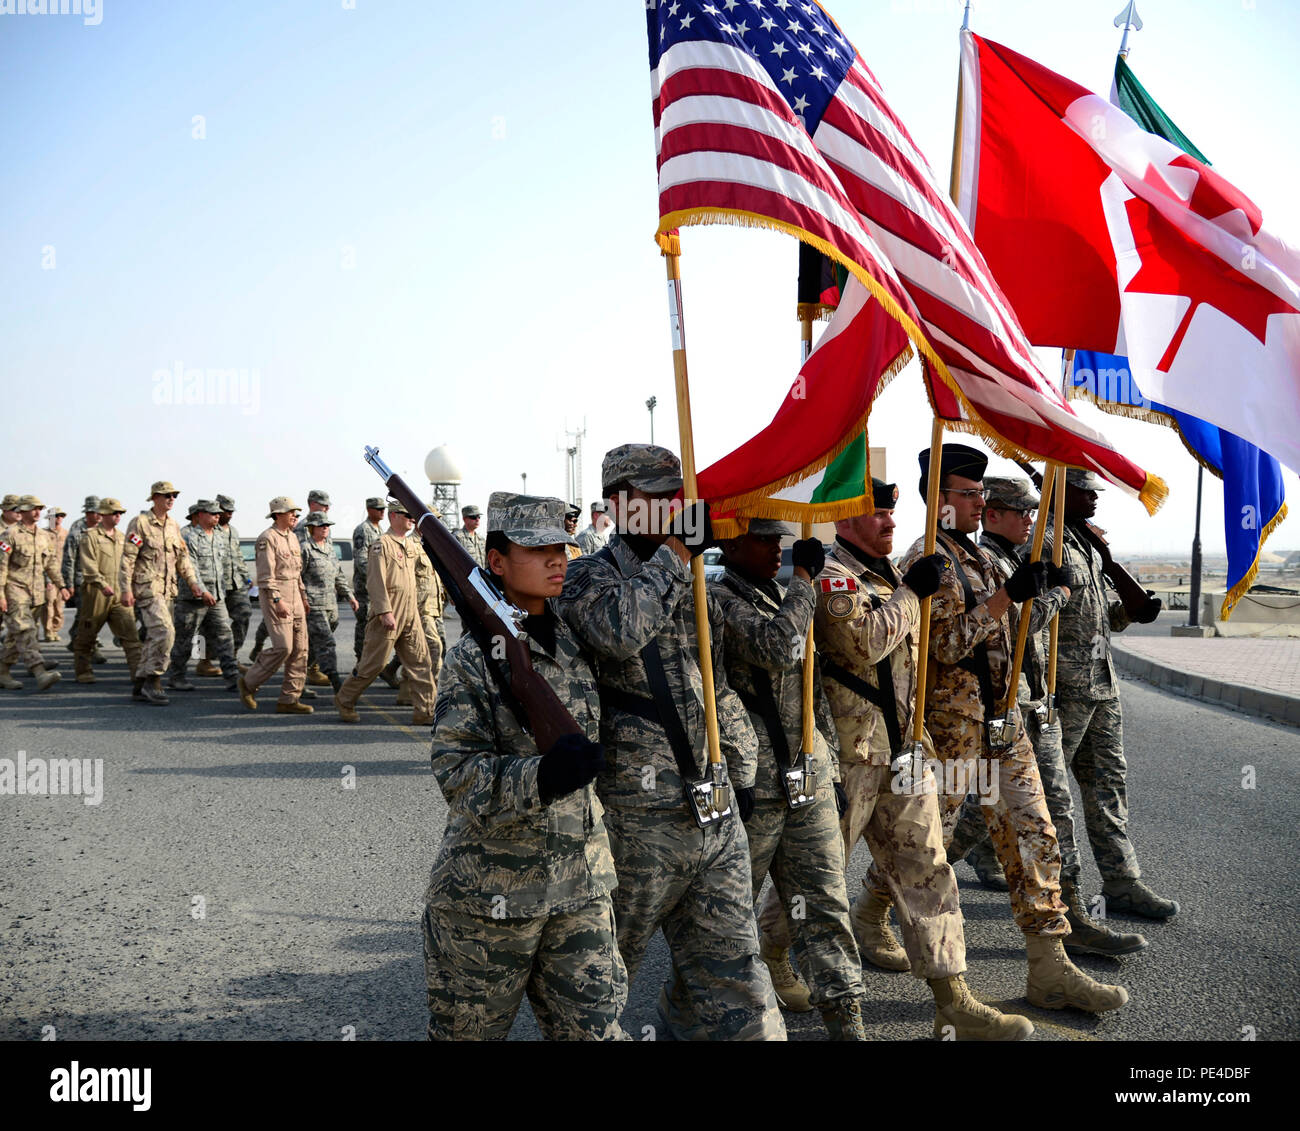 A coalition honor guard marches to a 9/11 memorial during a tribute ceremony at an undisclosed location in Southwest Asia, Sept. 11, 2015. Fourteen years after 9/11, America and its allies are still in the fight against acts of terrorism with Operation Inherent Resolve, the intervention against the Islamic State of Iraq and the Levant (ISIL). (U.S. Air Force photo by Senior Airman Racheal E. Watson/Released) Stock Photo